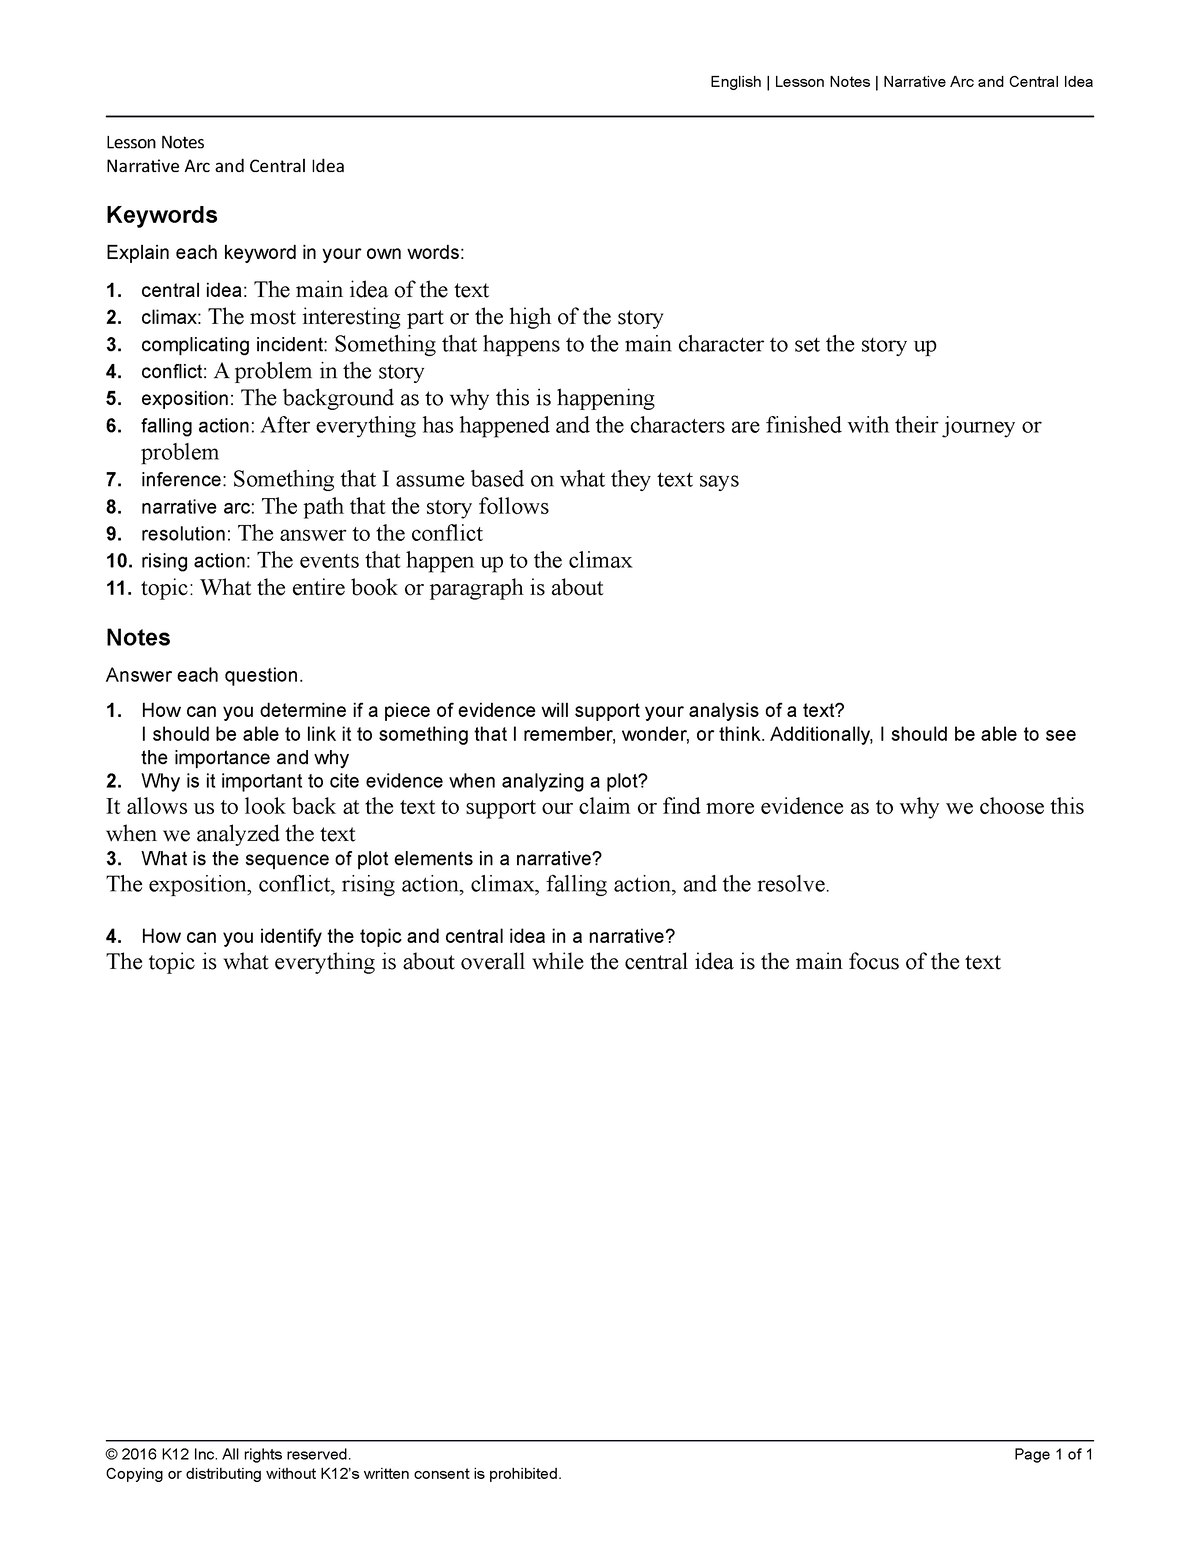 English Notebook 1 - English | Lesson Notes | Narrative Arc and Central ...